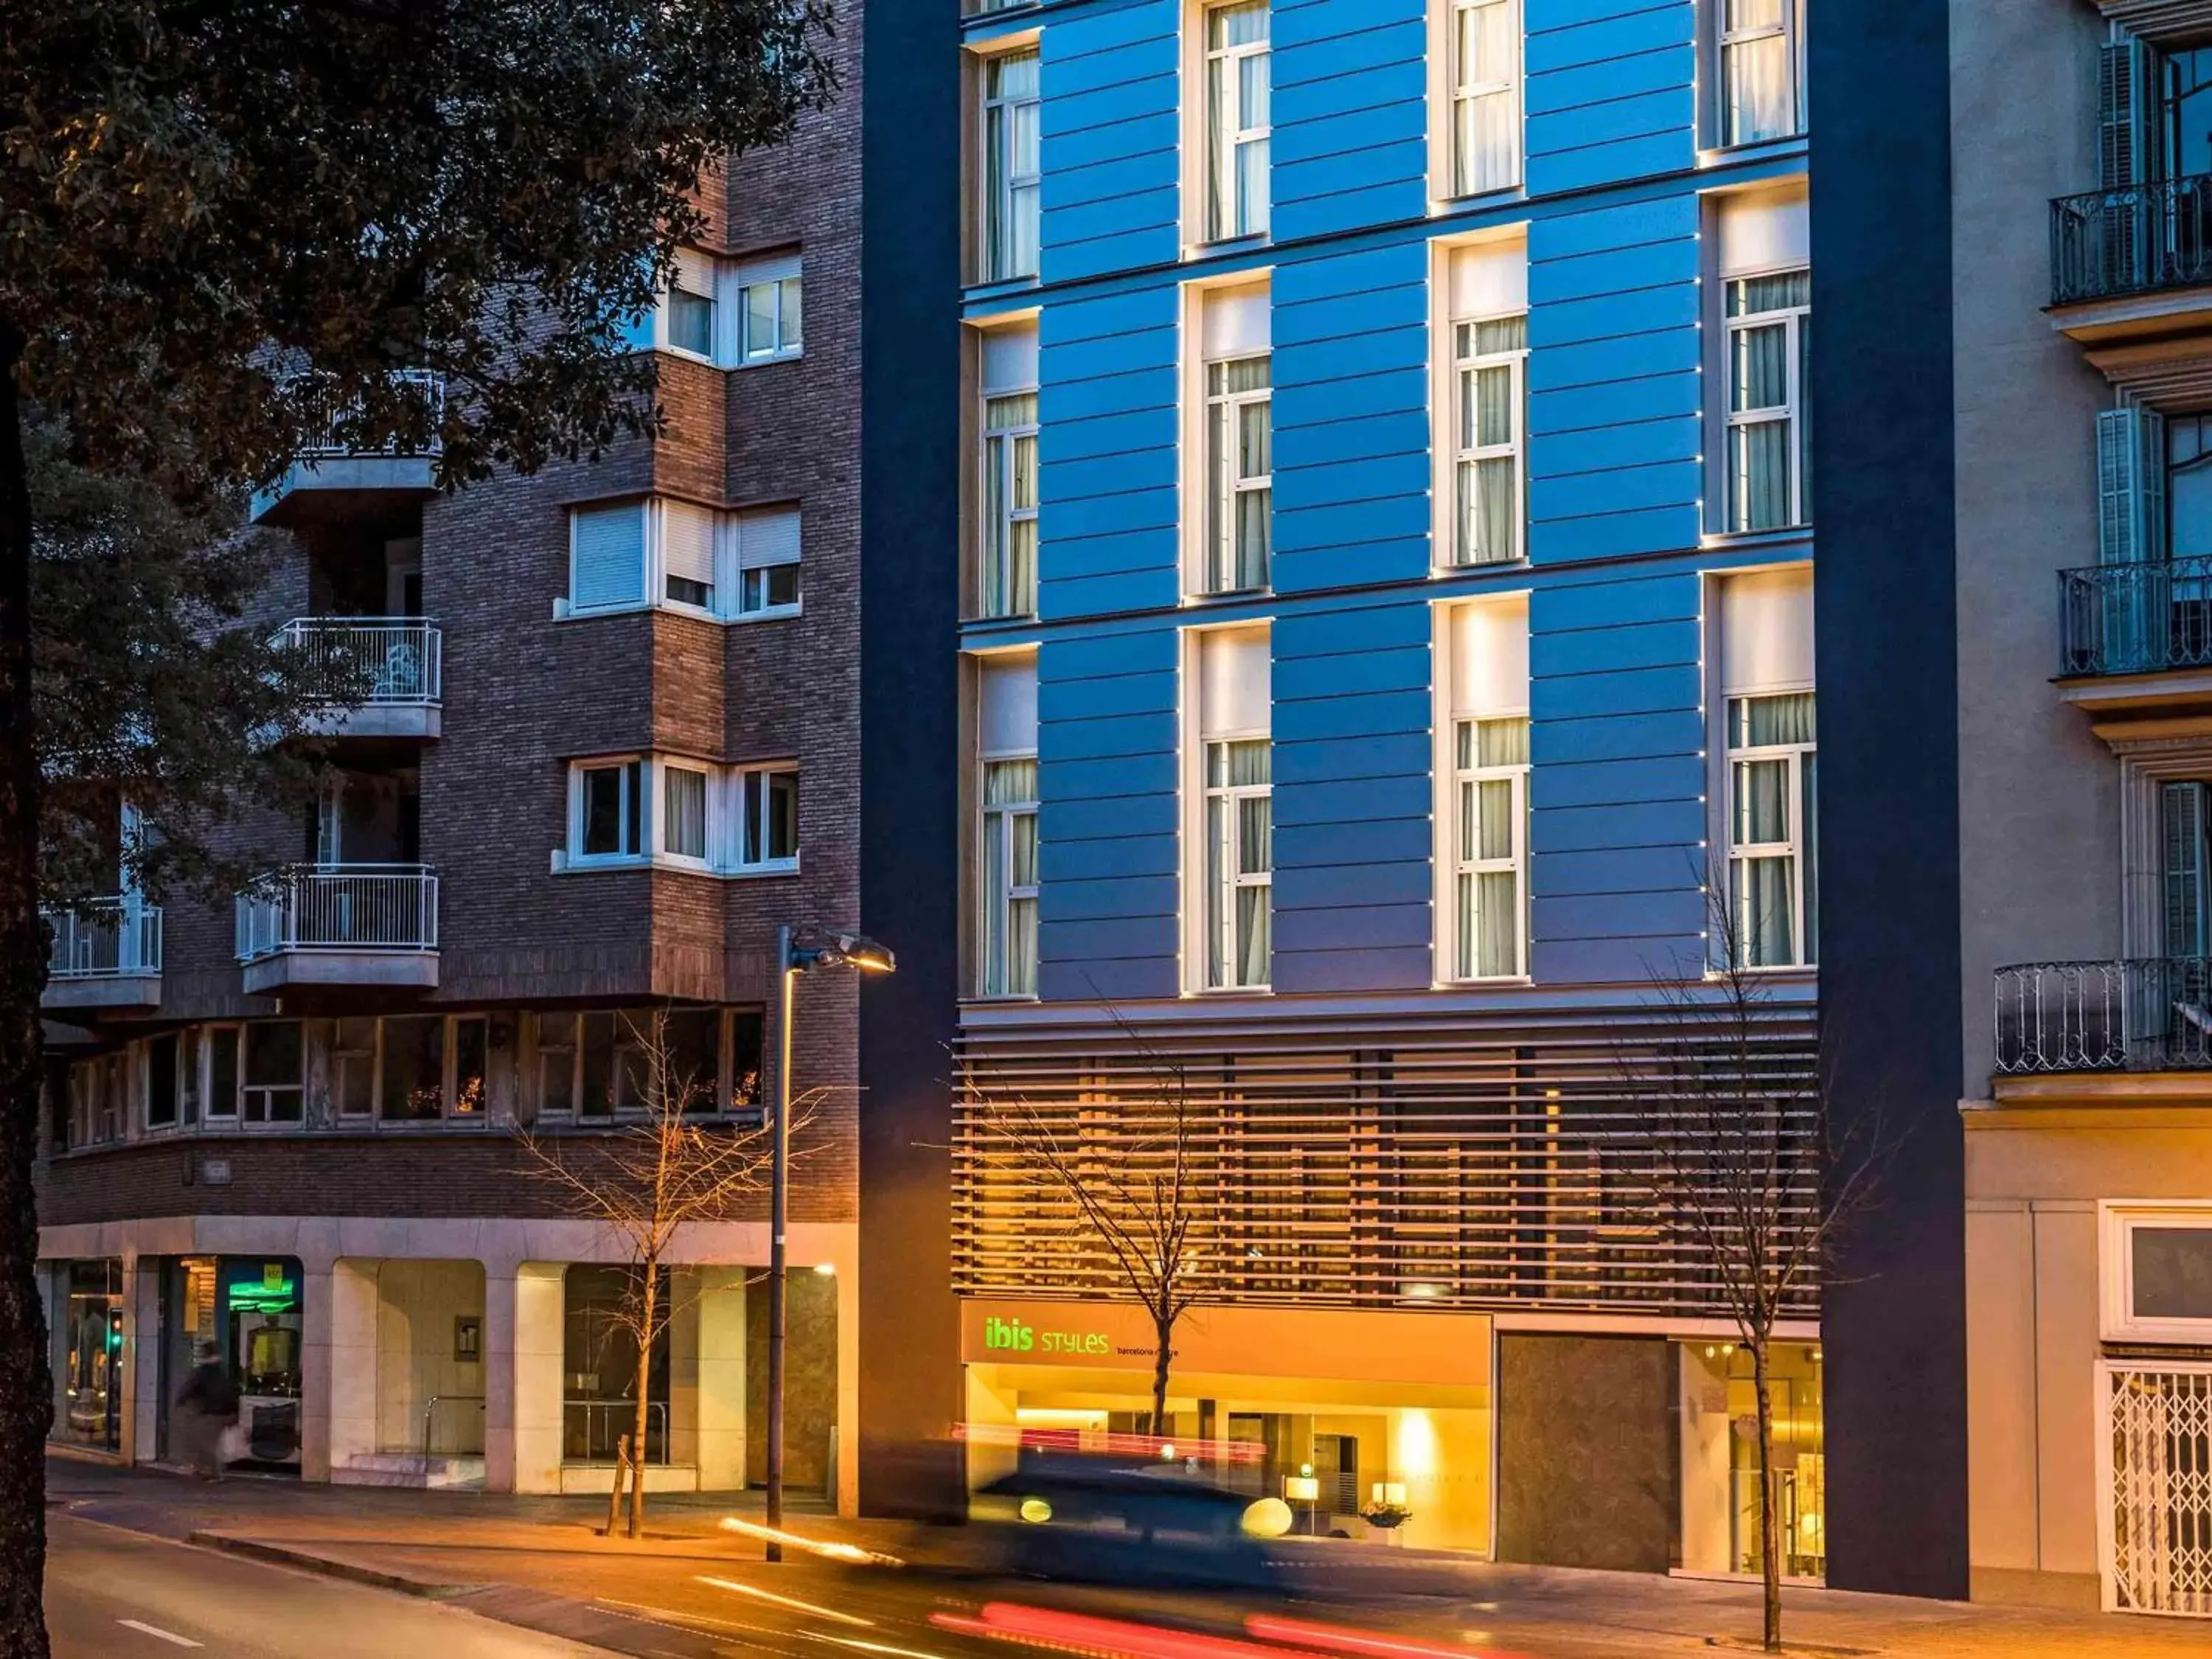 Property Building in ibis Styles Barcelona Centre